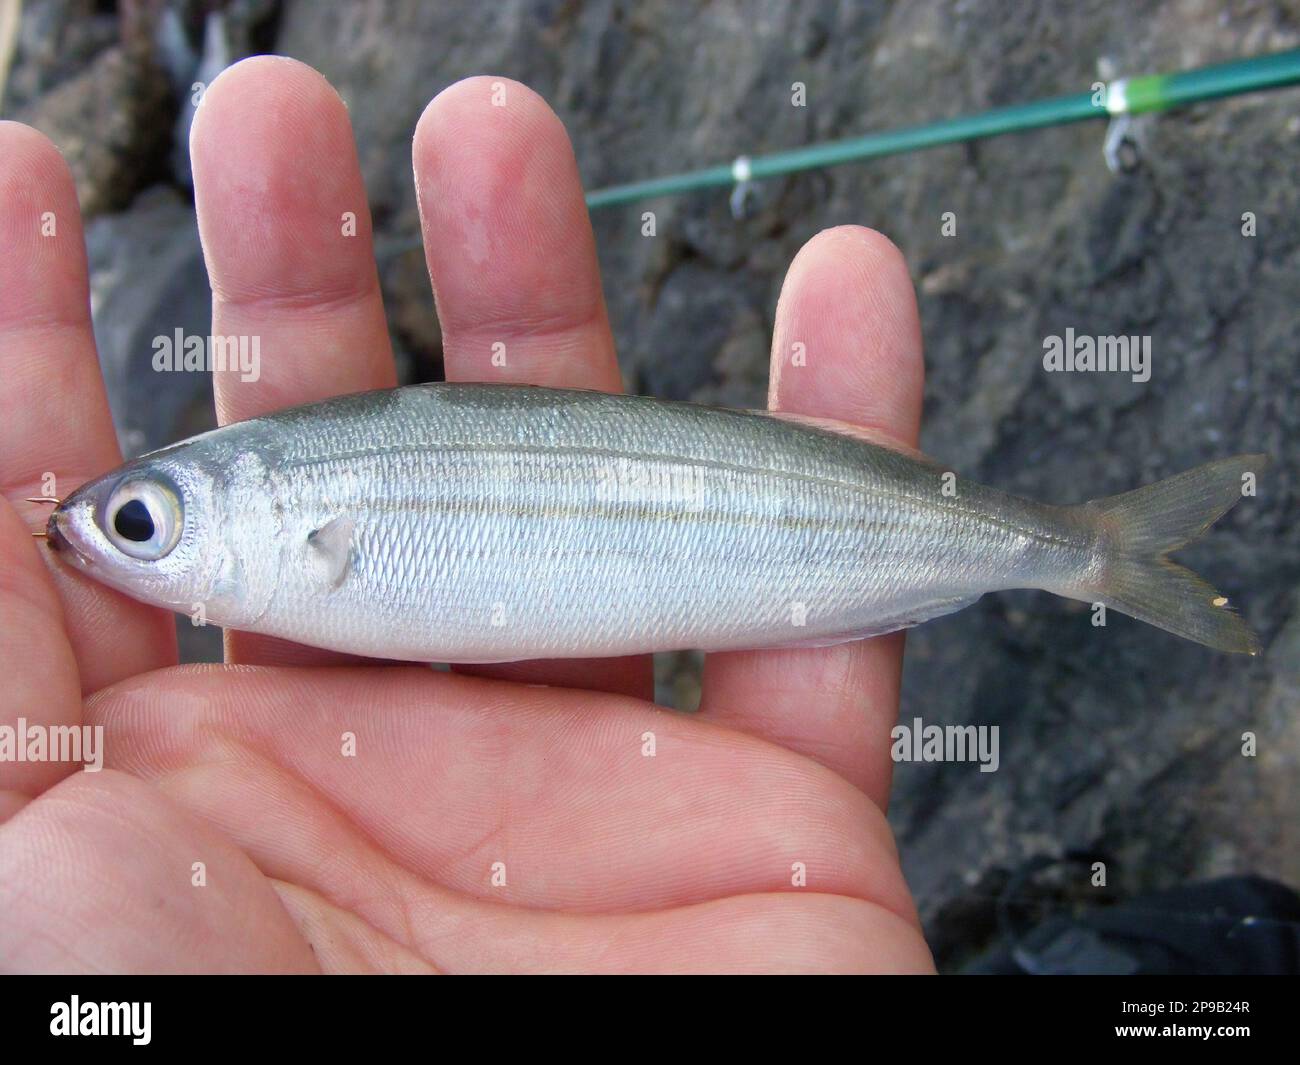 Bogue fish also known as Boops. A fish caught on a fishing rod off the coast of Spain. Stock Photo